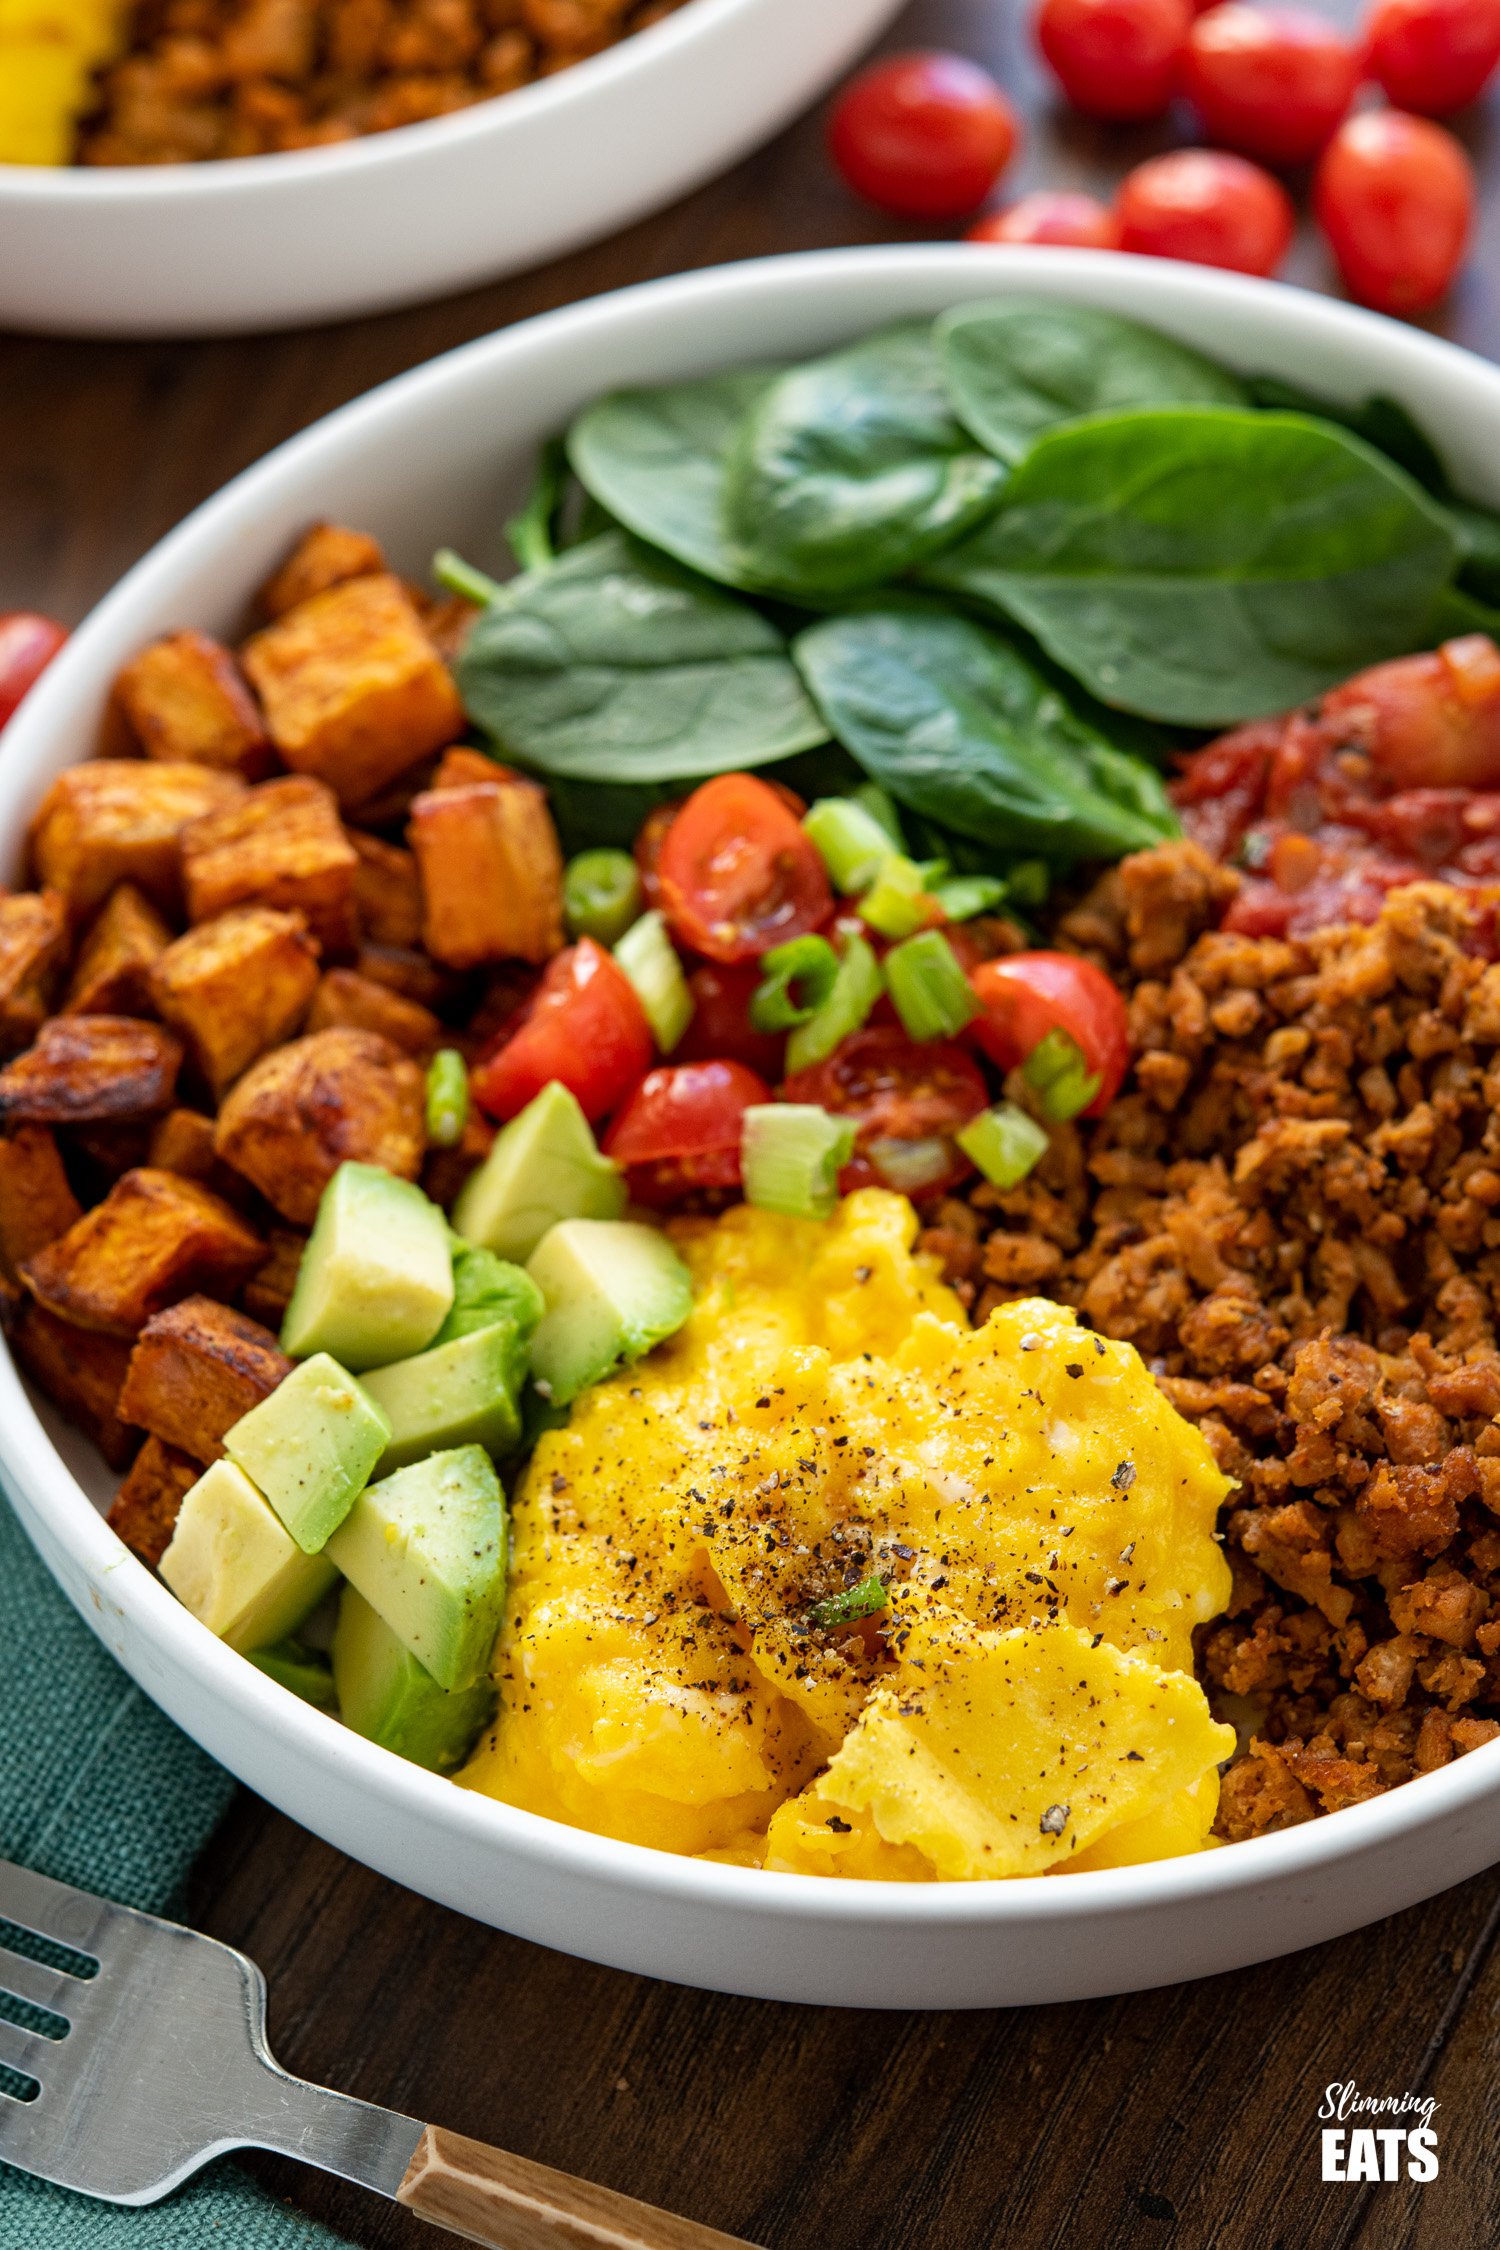 turkey taco meat, eggs, spinach, sweet potato, avocado, tomatoes in a bowl with additional bowl in background with scattered tomatoes and half an avocado